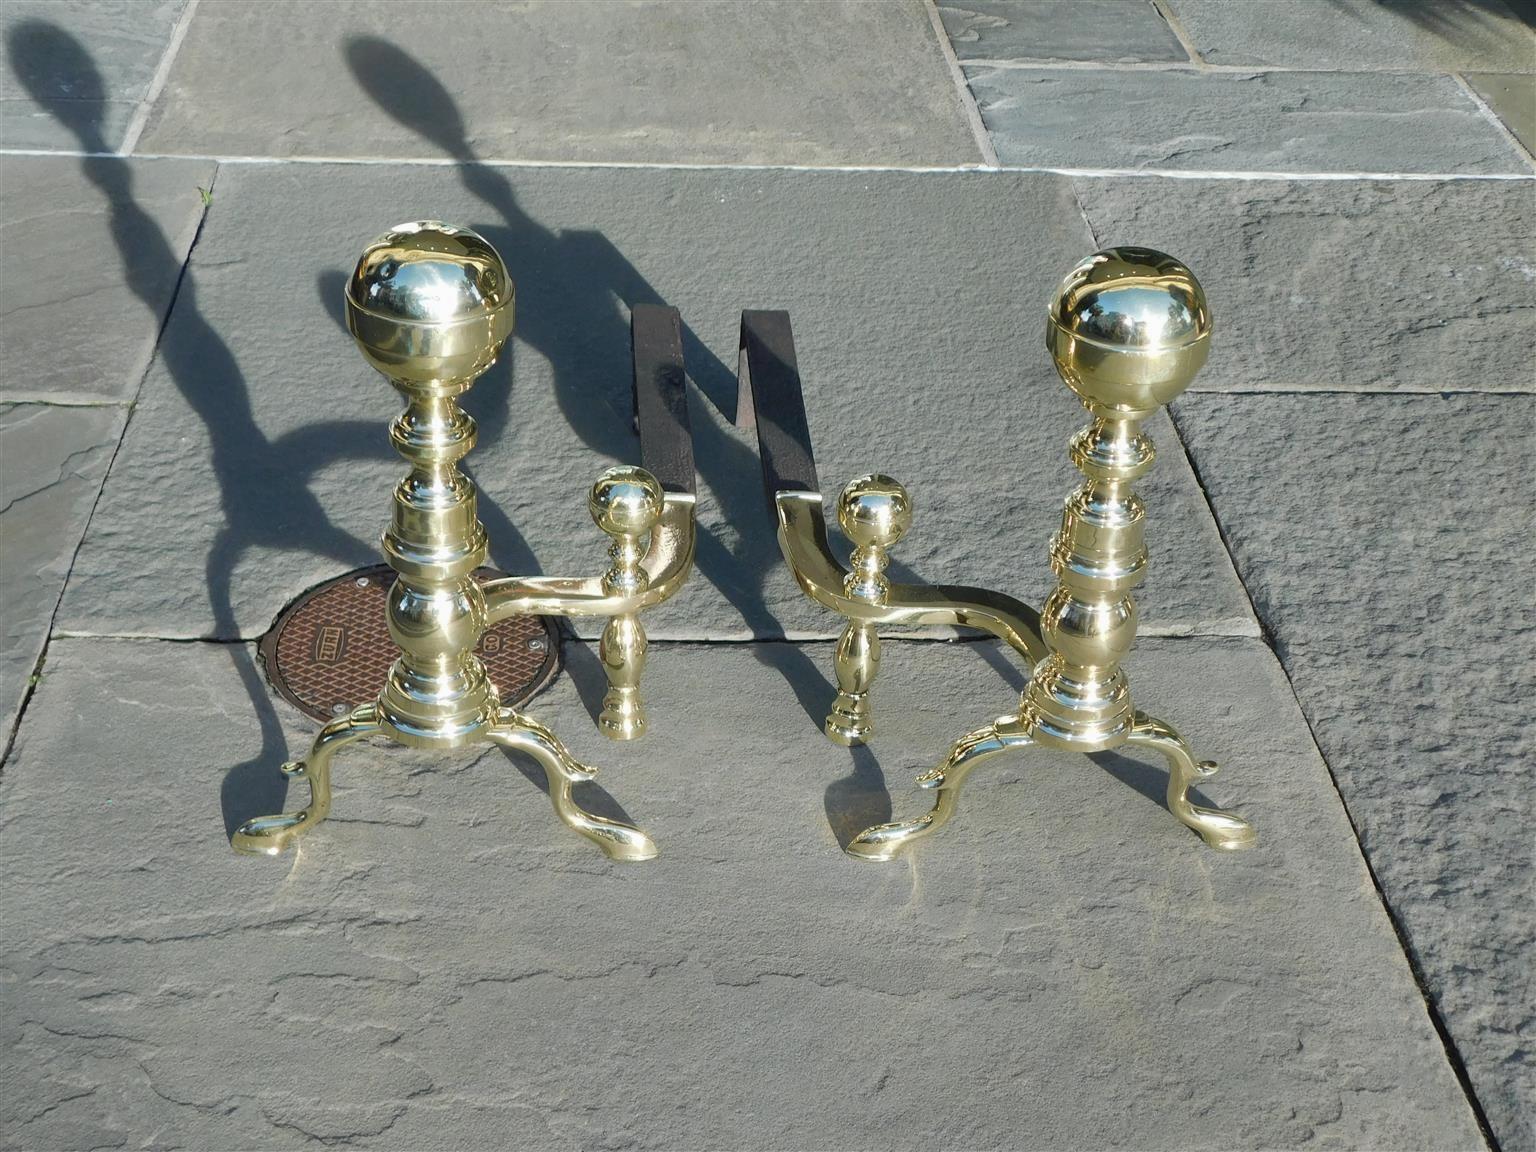 Pair of American brass ball finial andirons with bulbous ringed plinths, spur legs, curvature matching log stops, wrought iron dog legs, and resting on original slipper feet. Boston, MA. Early 19th Century. Wrought iron dogs legs can be adjusted in